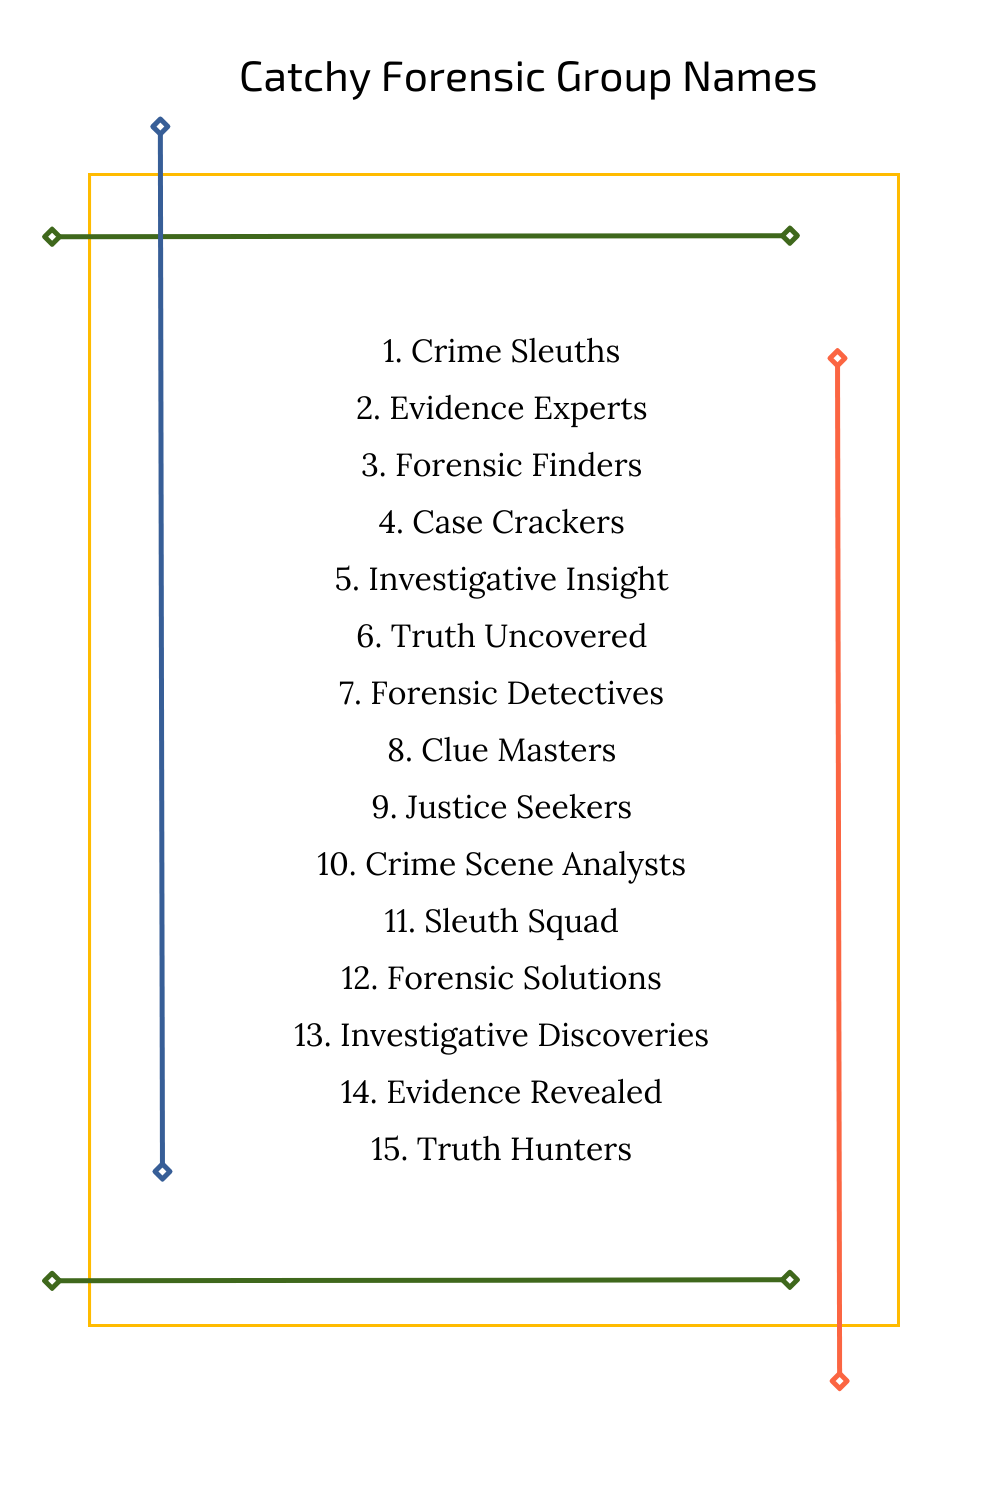 Catchy Forensic Group Names